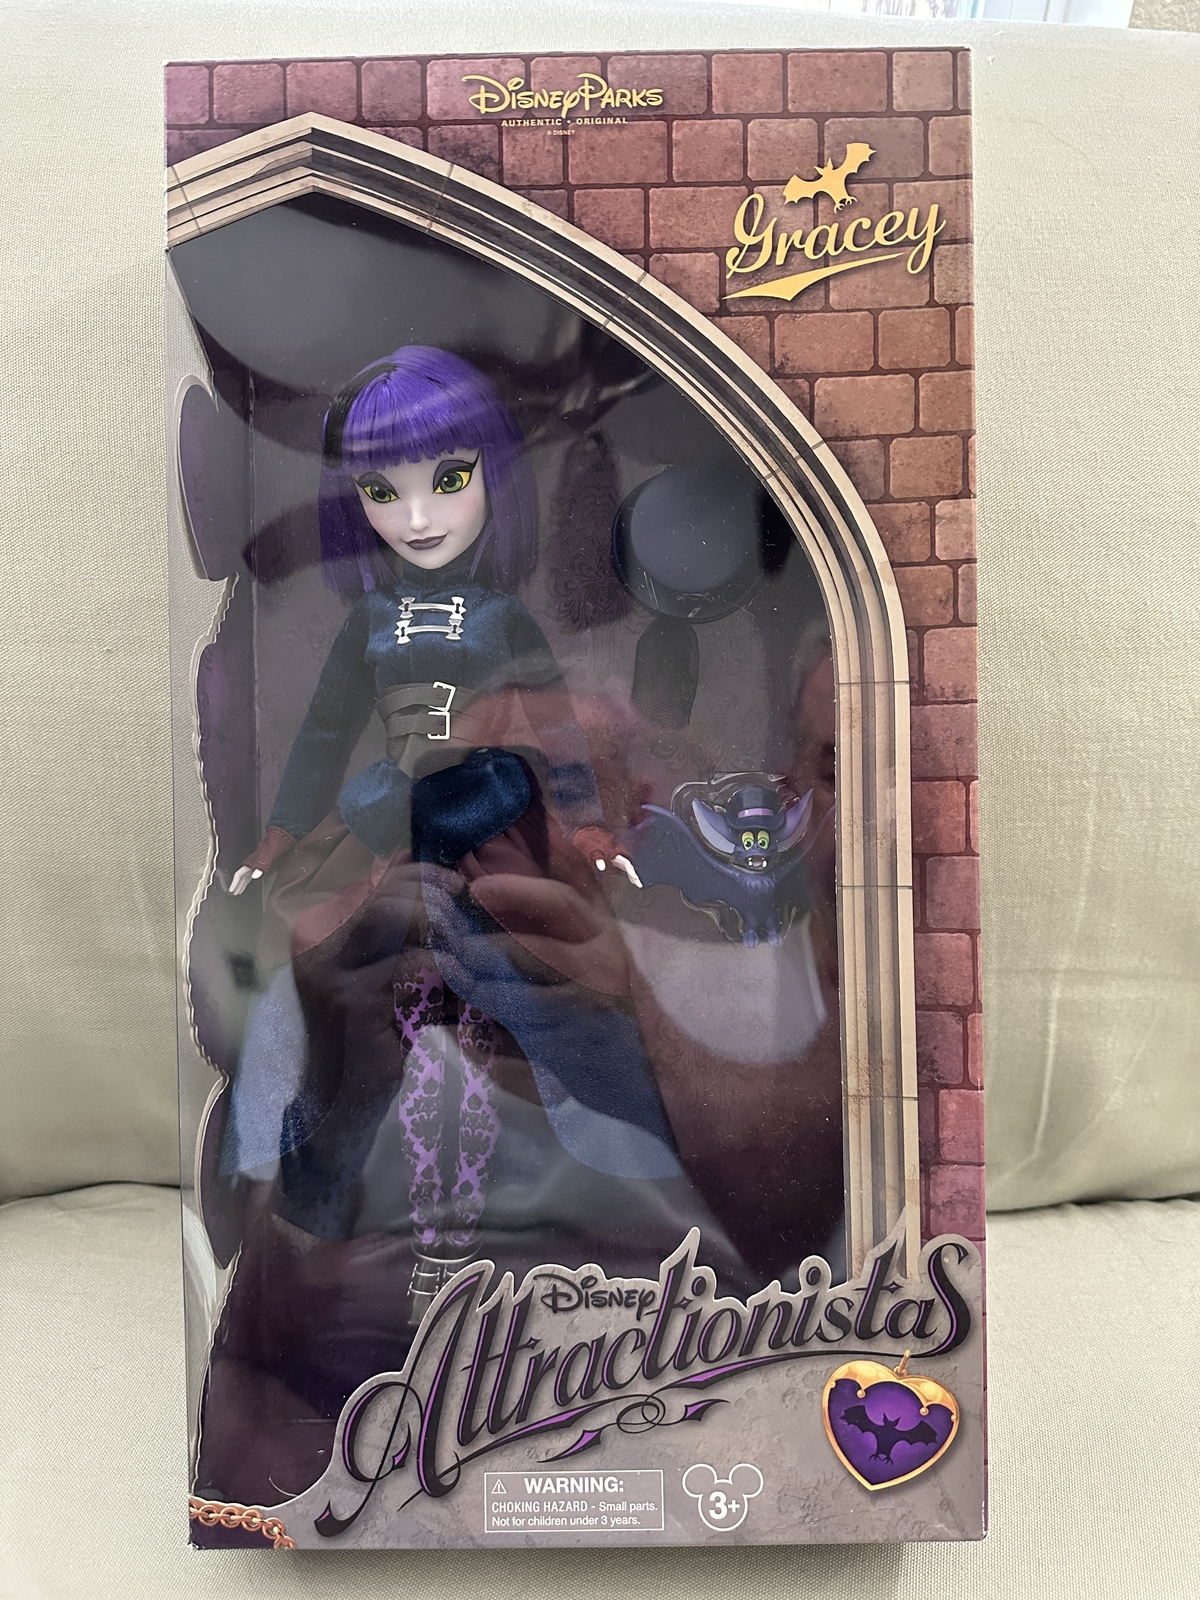 Disney Parks Attractionistas Gracie Haunted Mansion Doll NEW IN BOX RARE RETIRED - $194.90